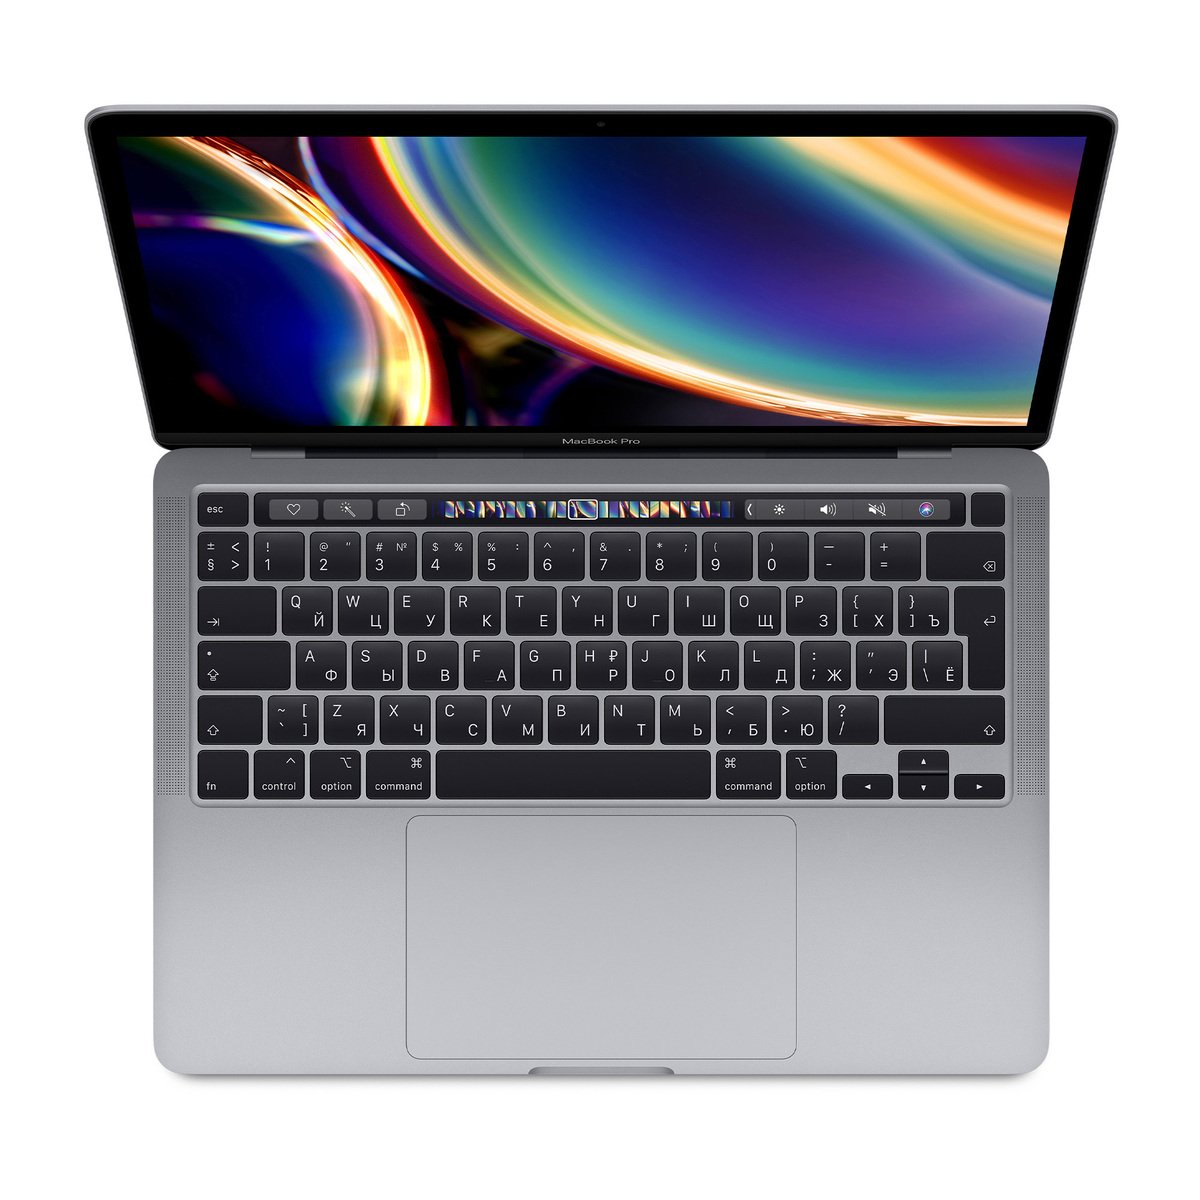 MacBook Pro 13-inch with Touch Bar and Touch ID (2020) MWP52AB/A Core i5 2GHz, 16GB RAM, 1TB SSD, Intel Iris Plus Graphics,English/Arabic Keyboard,Space Grey